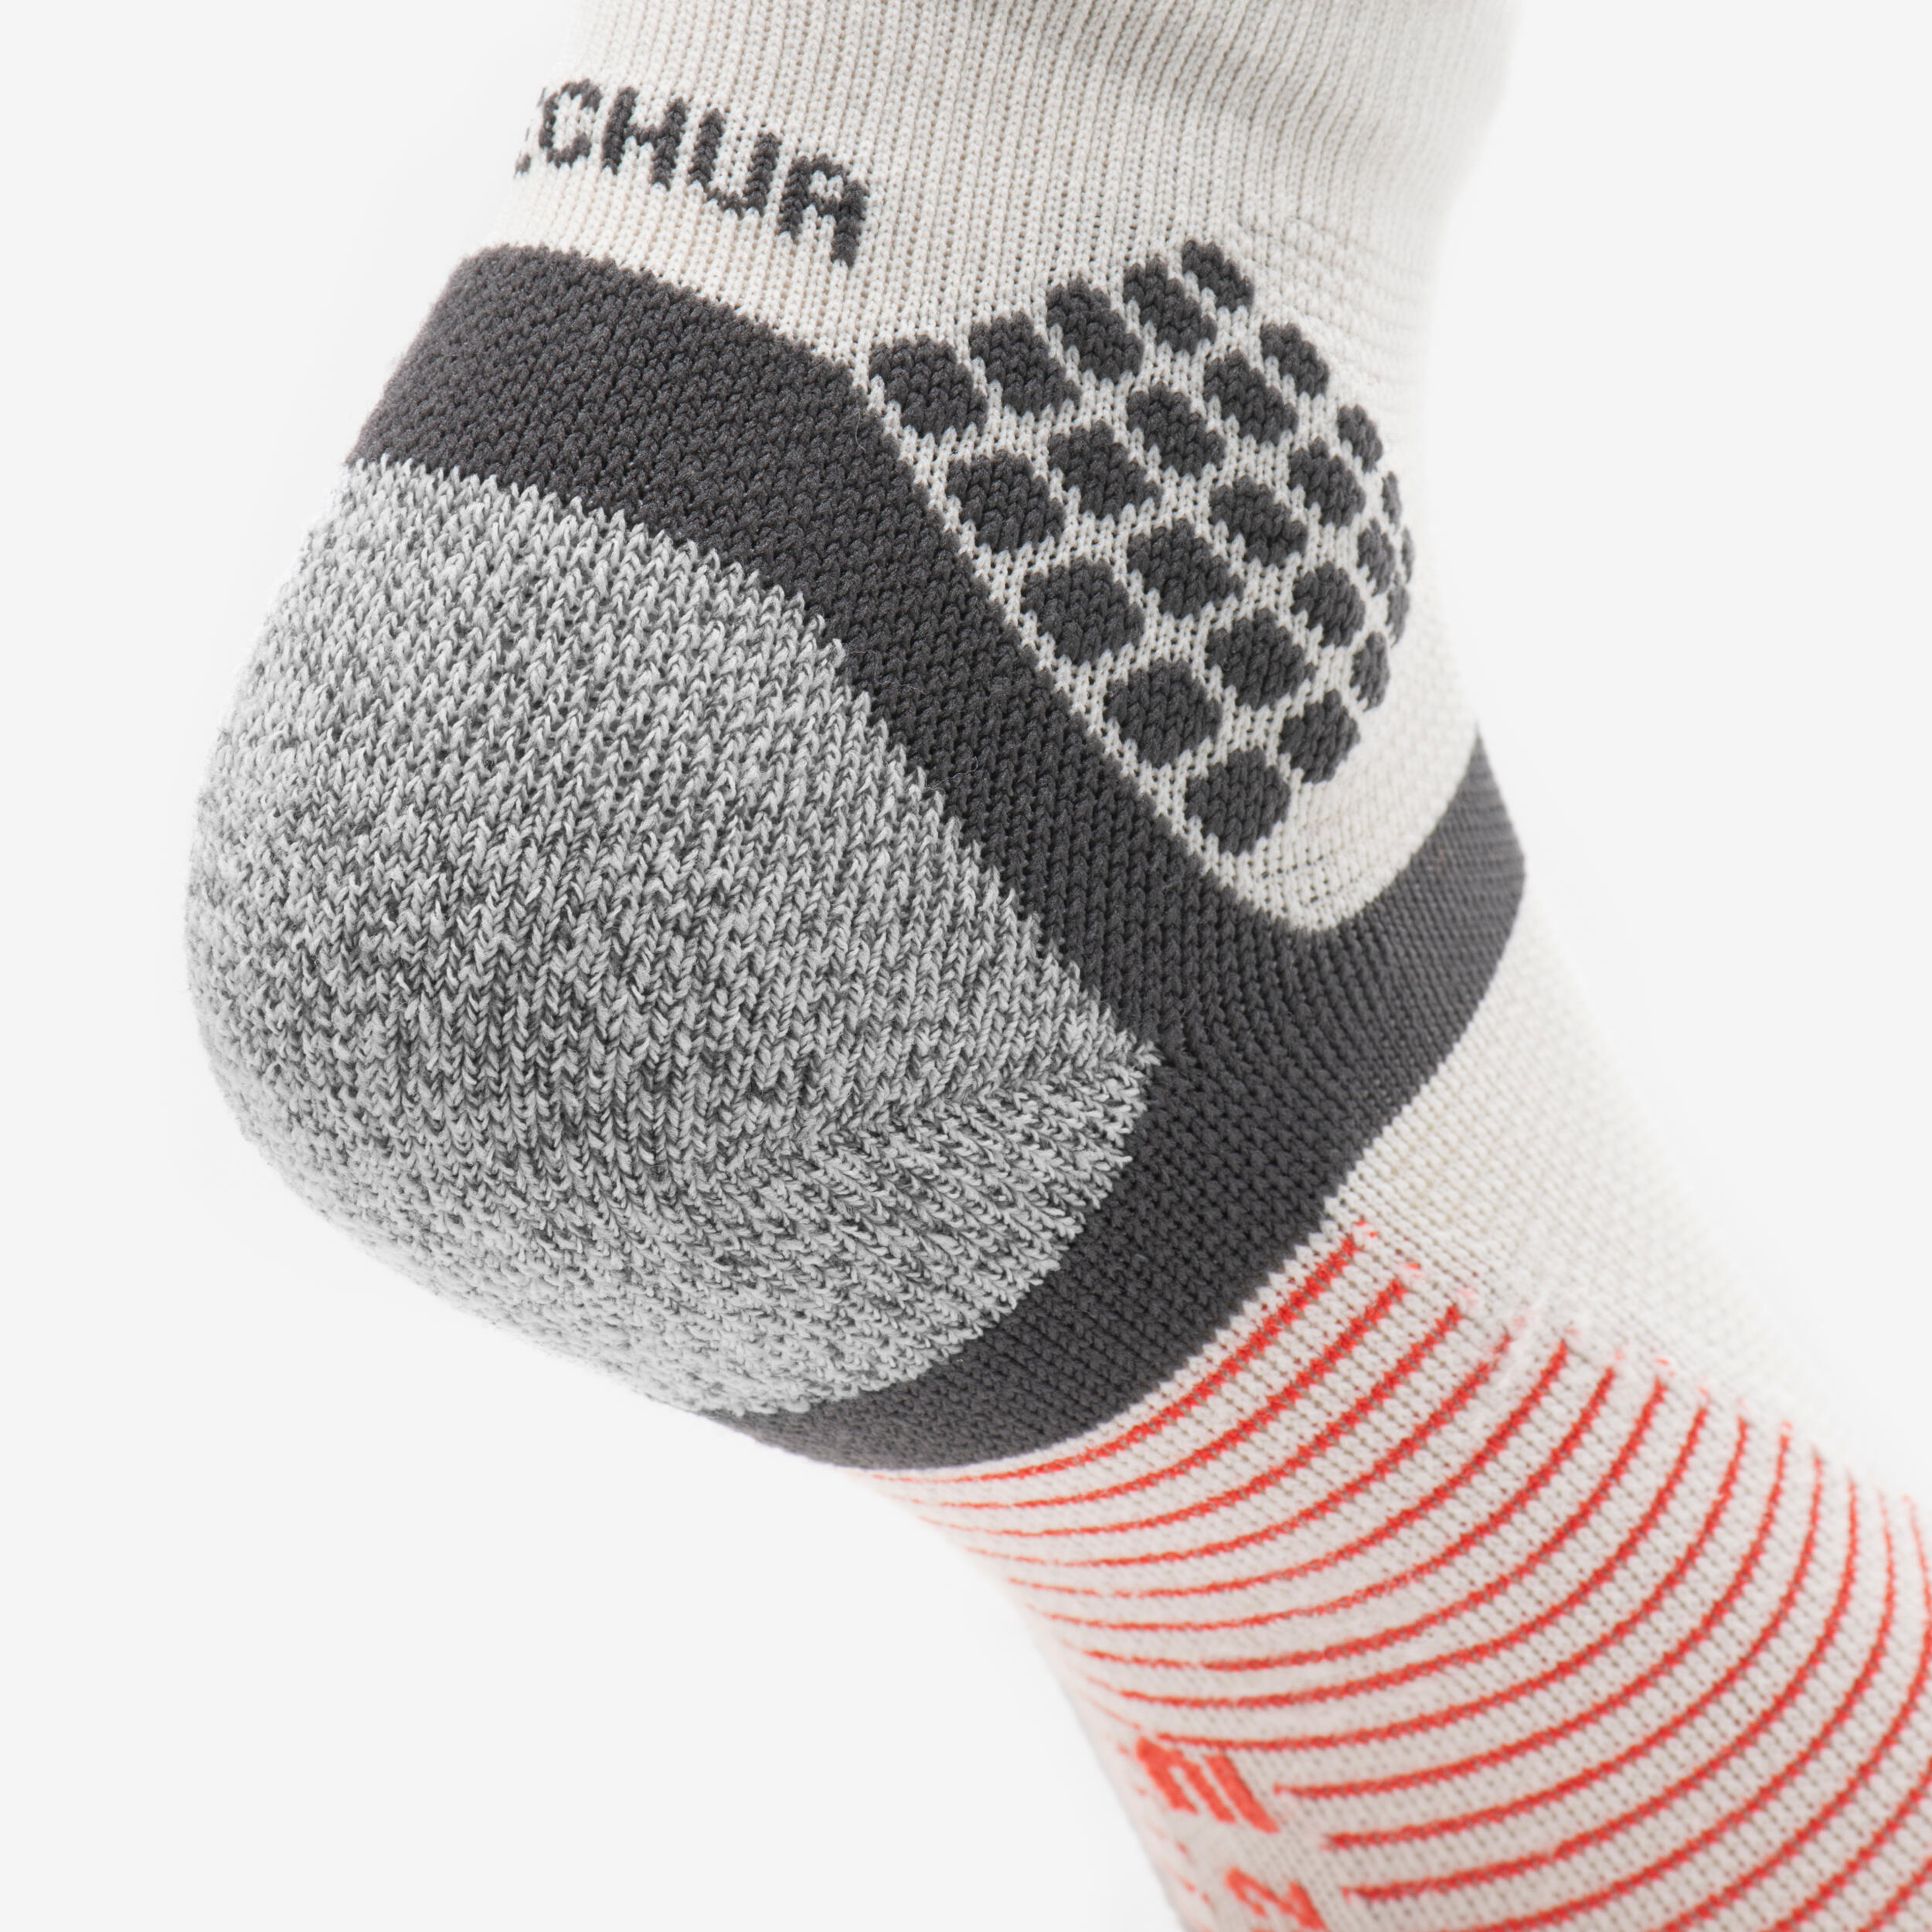 Hiking Socks Hike 500 Mid x2 Pairs - Grey and Red 6/7